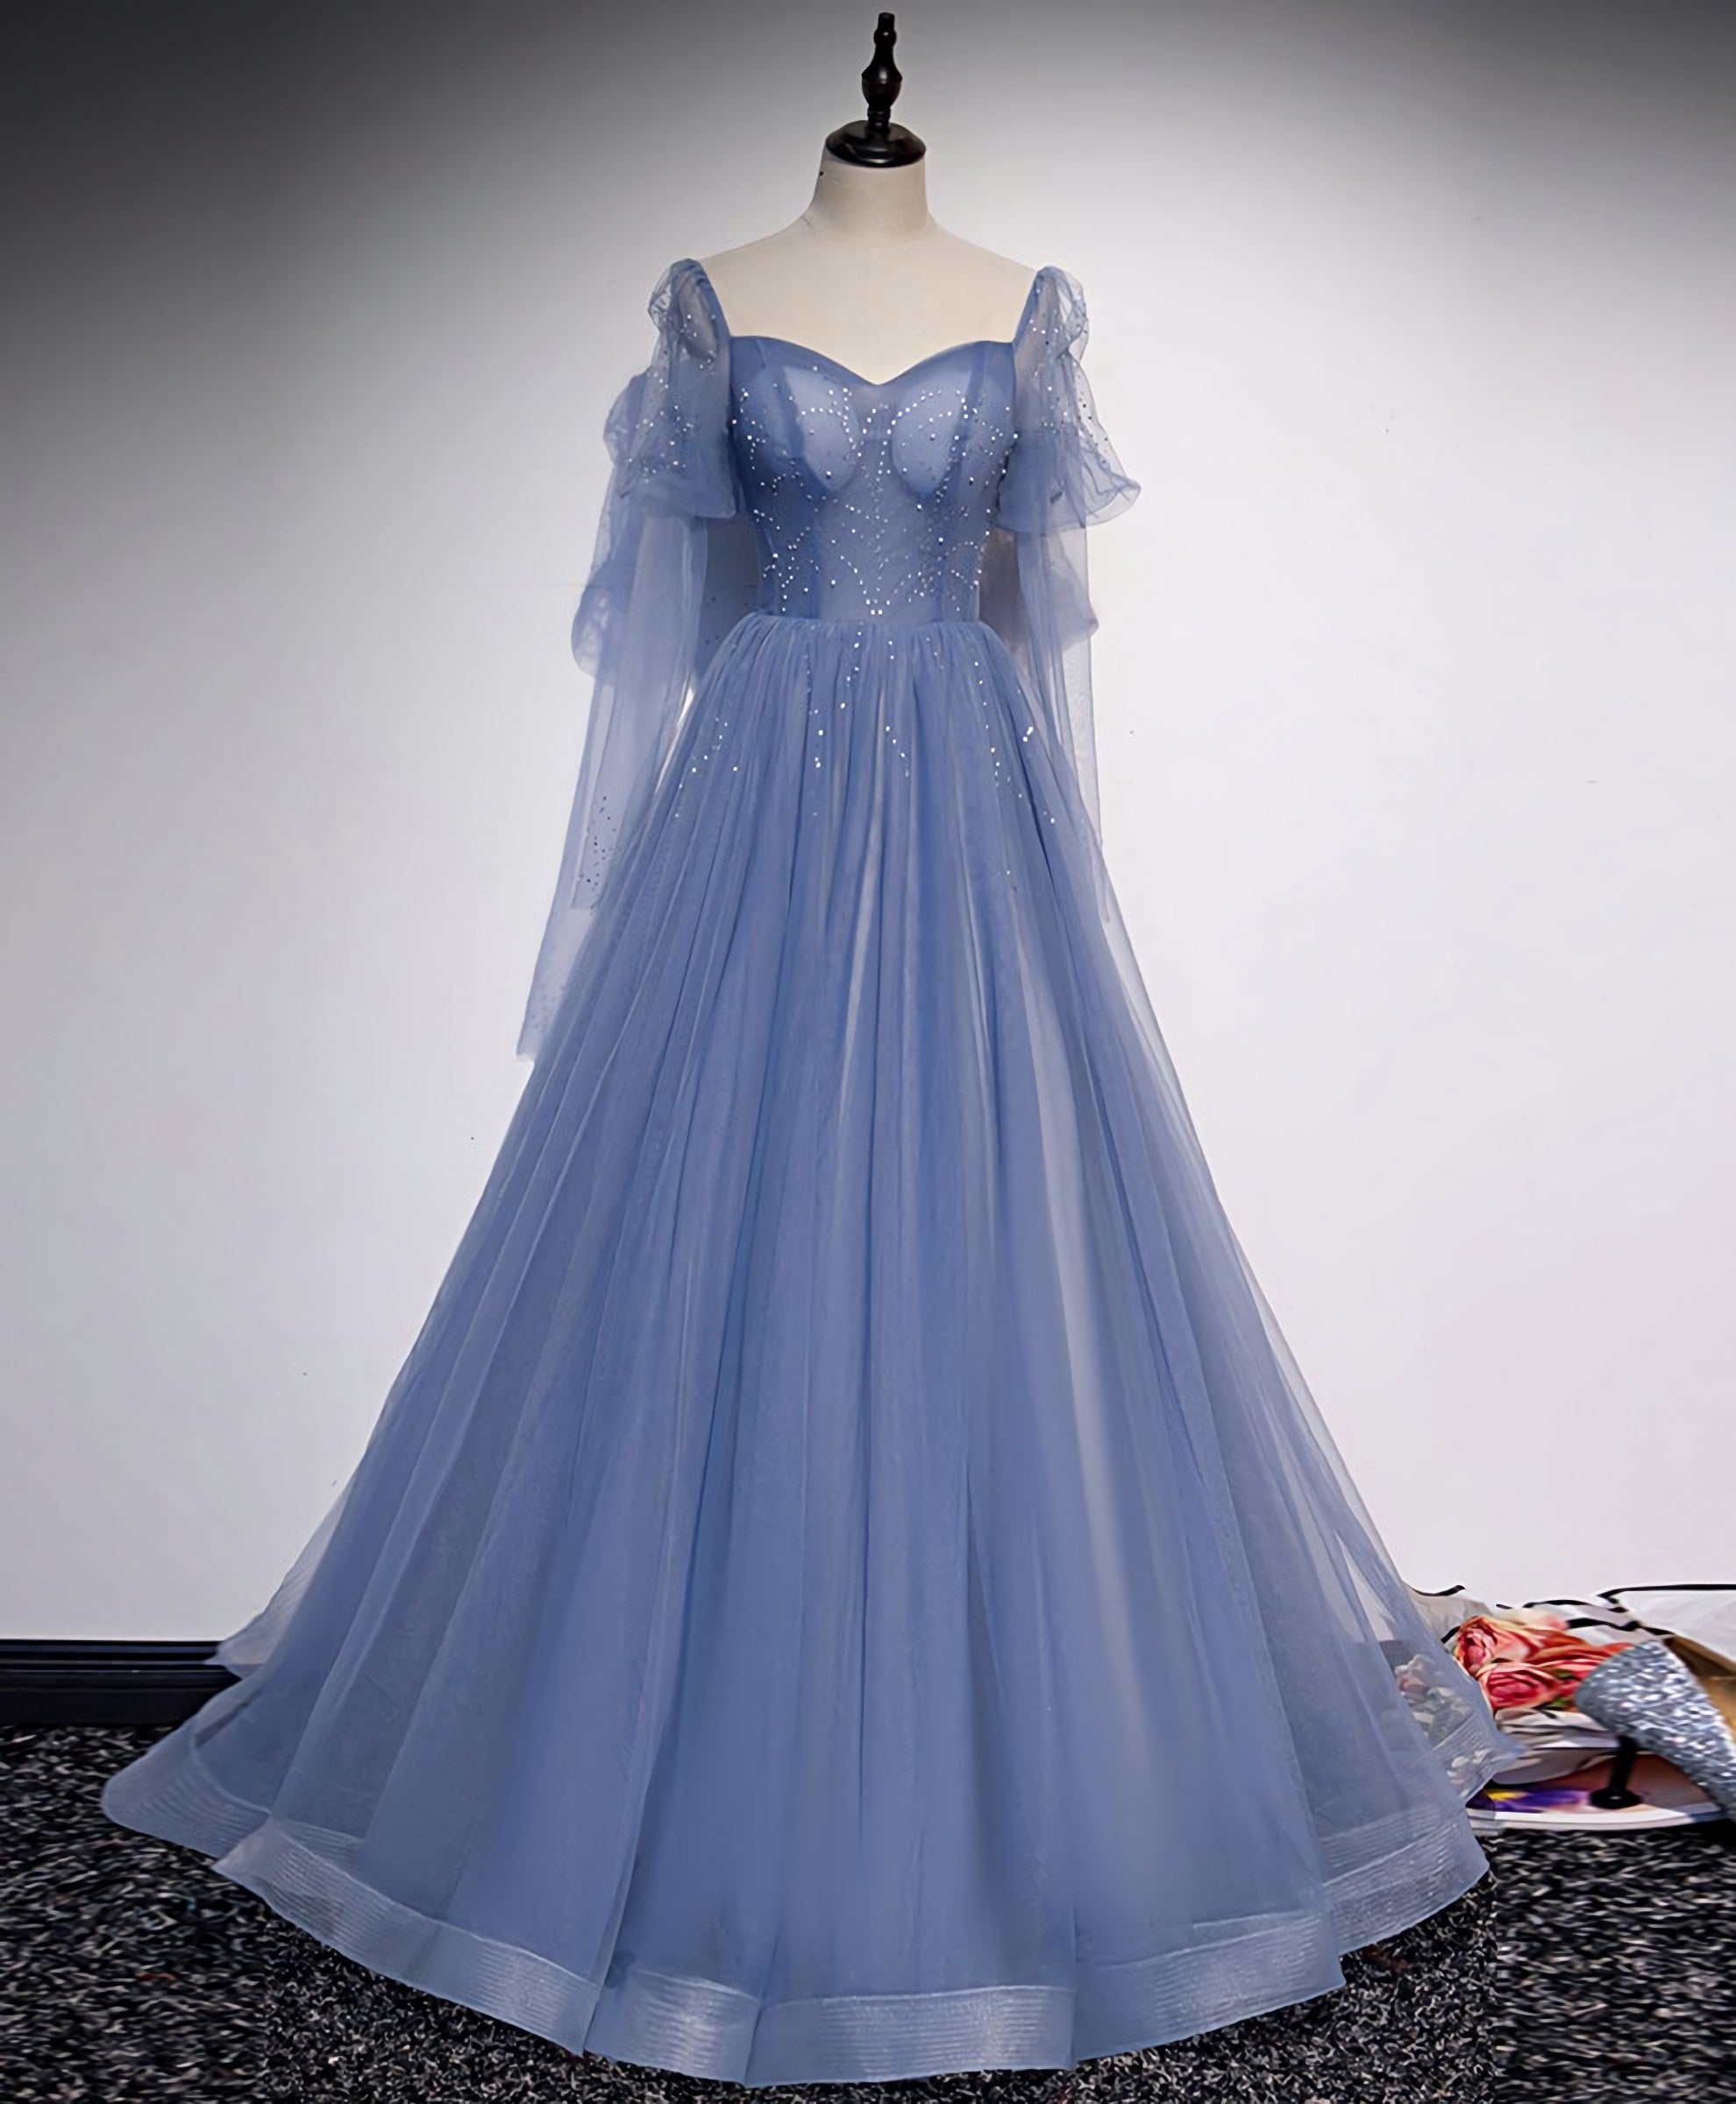 Blue Tulle Sweetheart Long Corset Prom Dress, Blue Tulle Corset Formal Dress outfit, Prom Dresses Sites